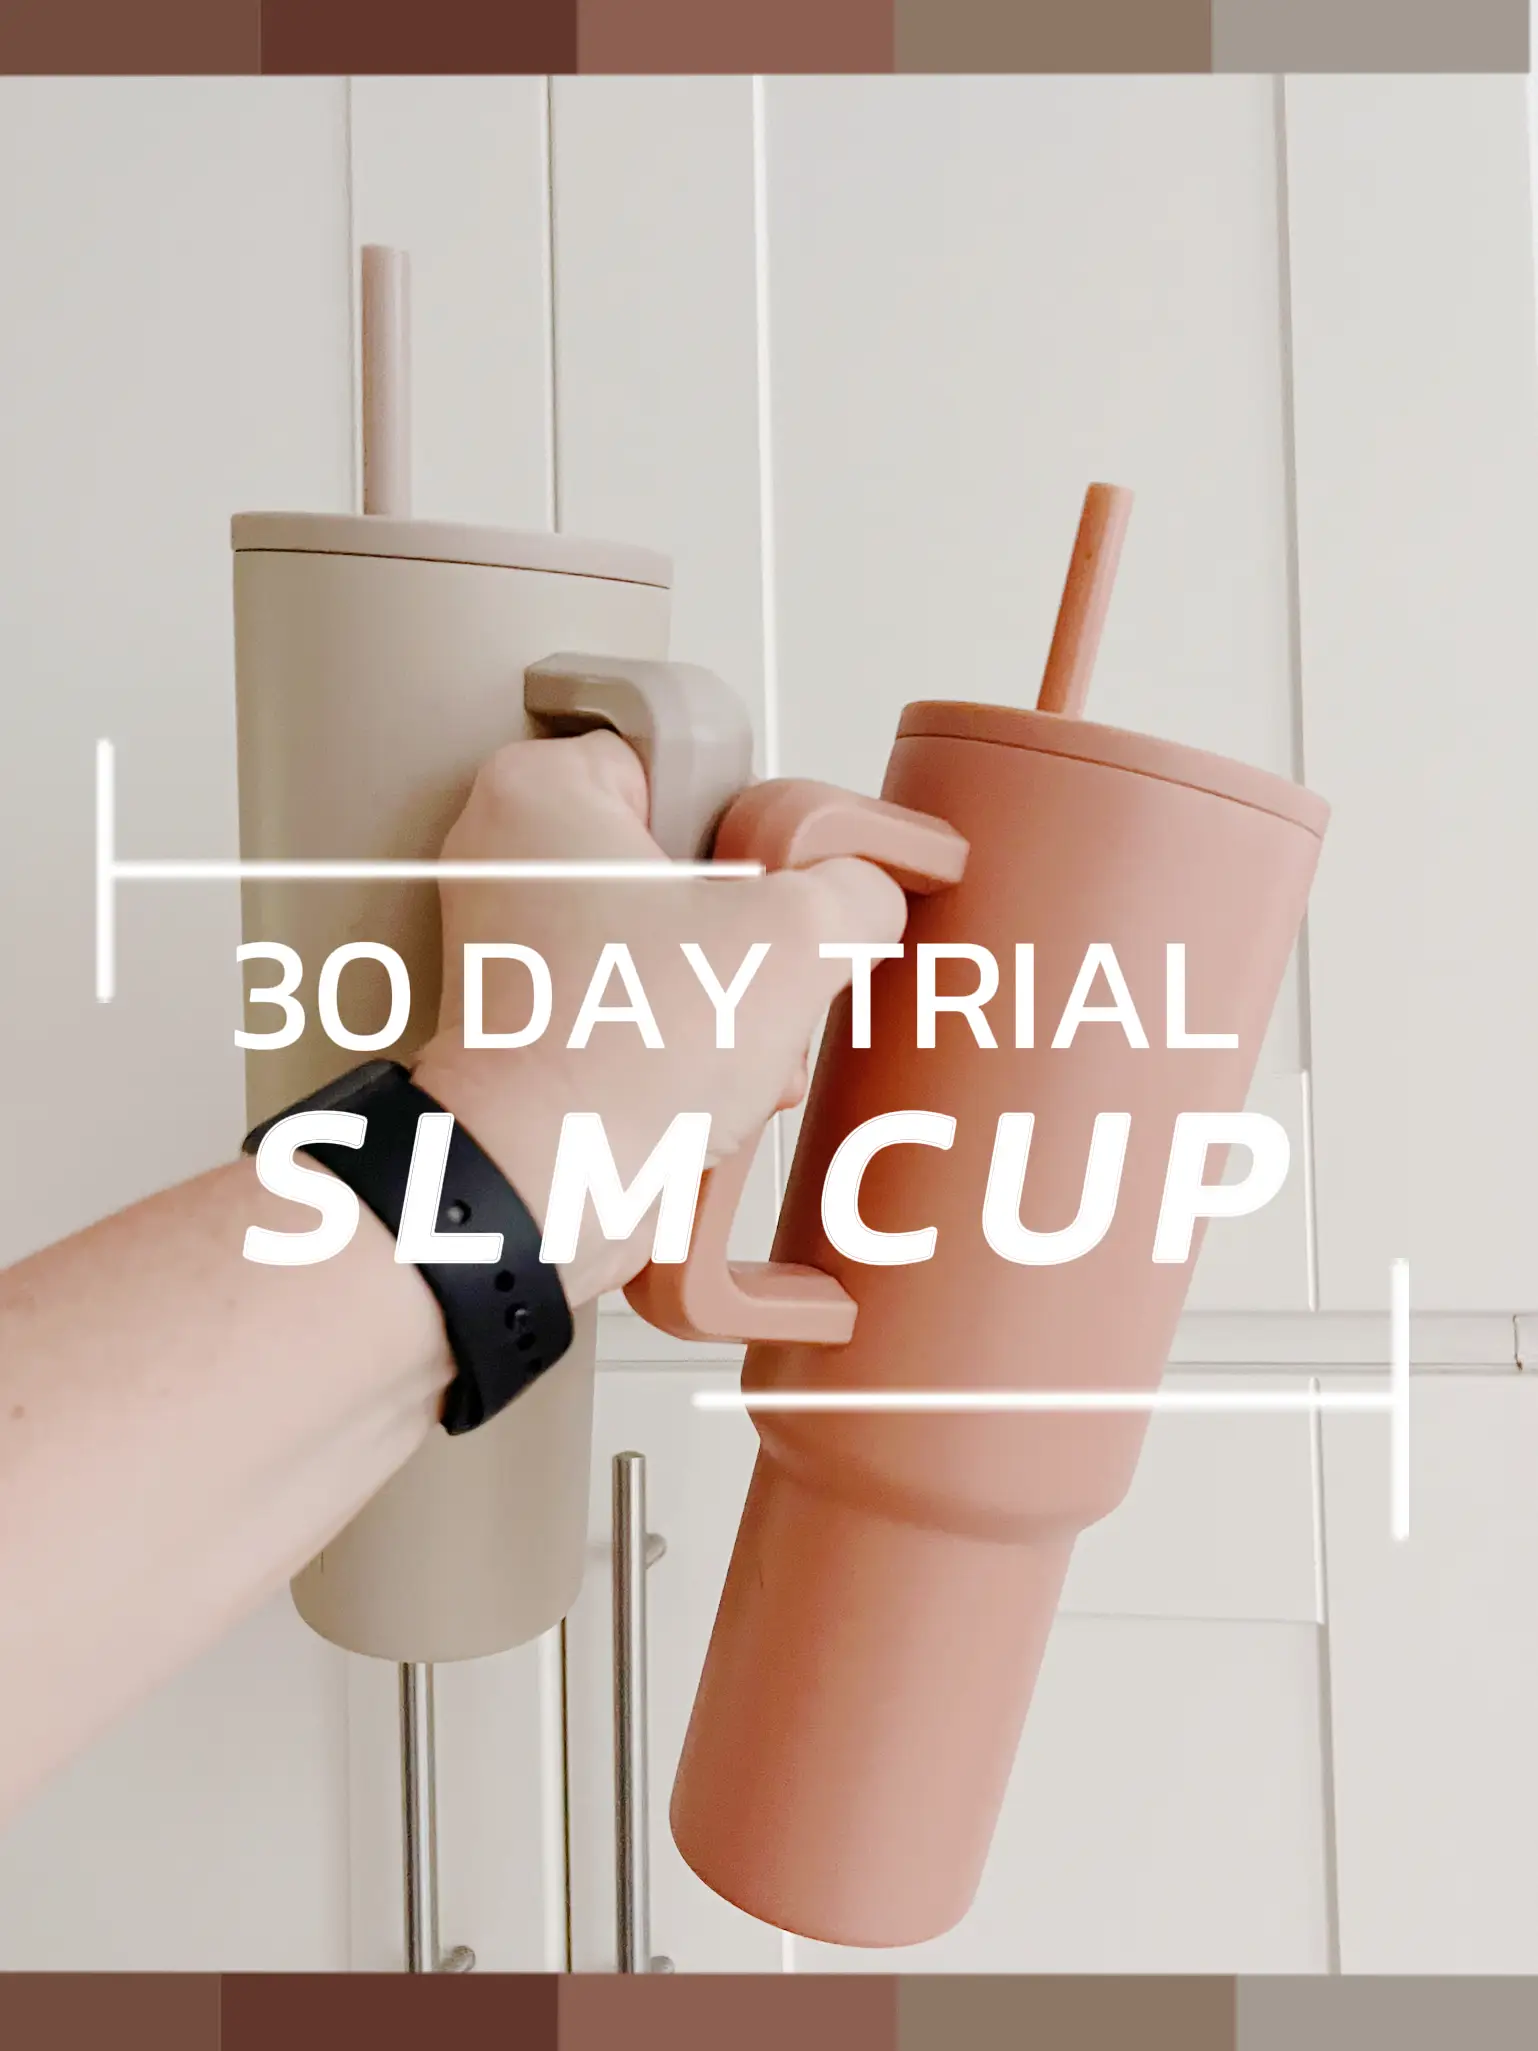 I used the Slm Cup for 30 days…  Gallery posted by Heather Willis